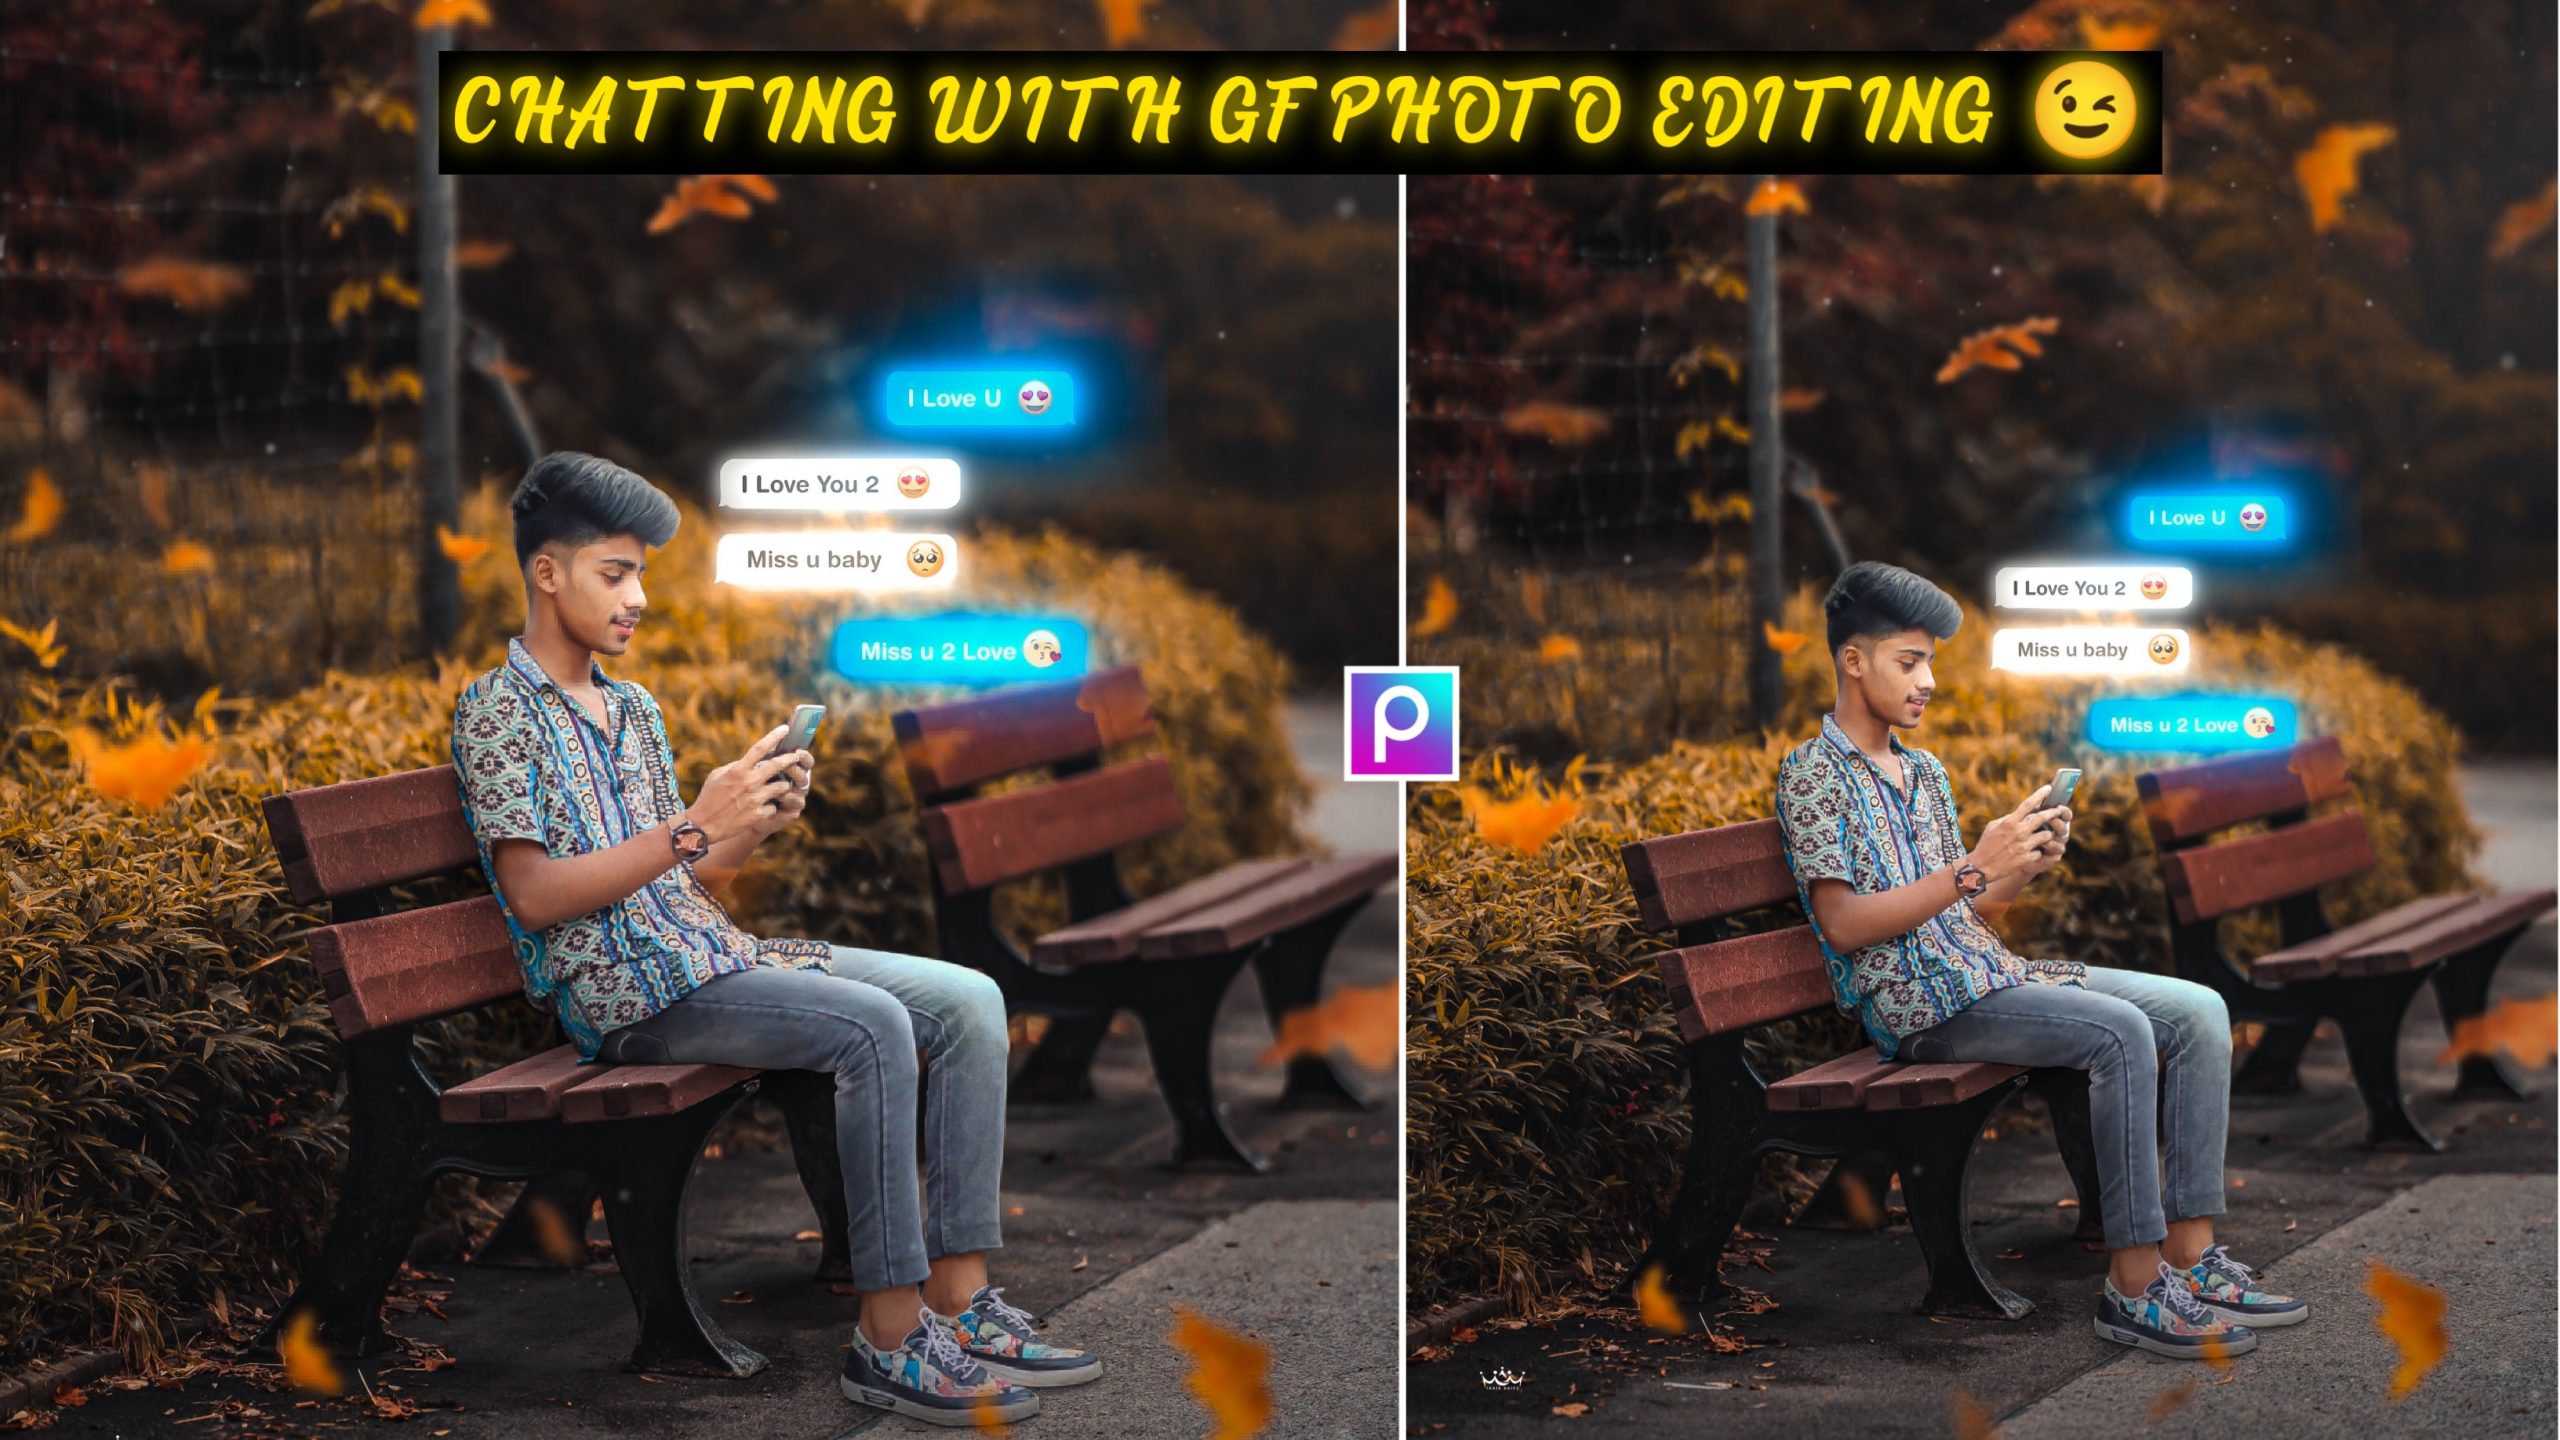 Chatting With GF Photo Editing Download Background And PNG - Tahir Editz